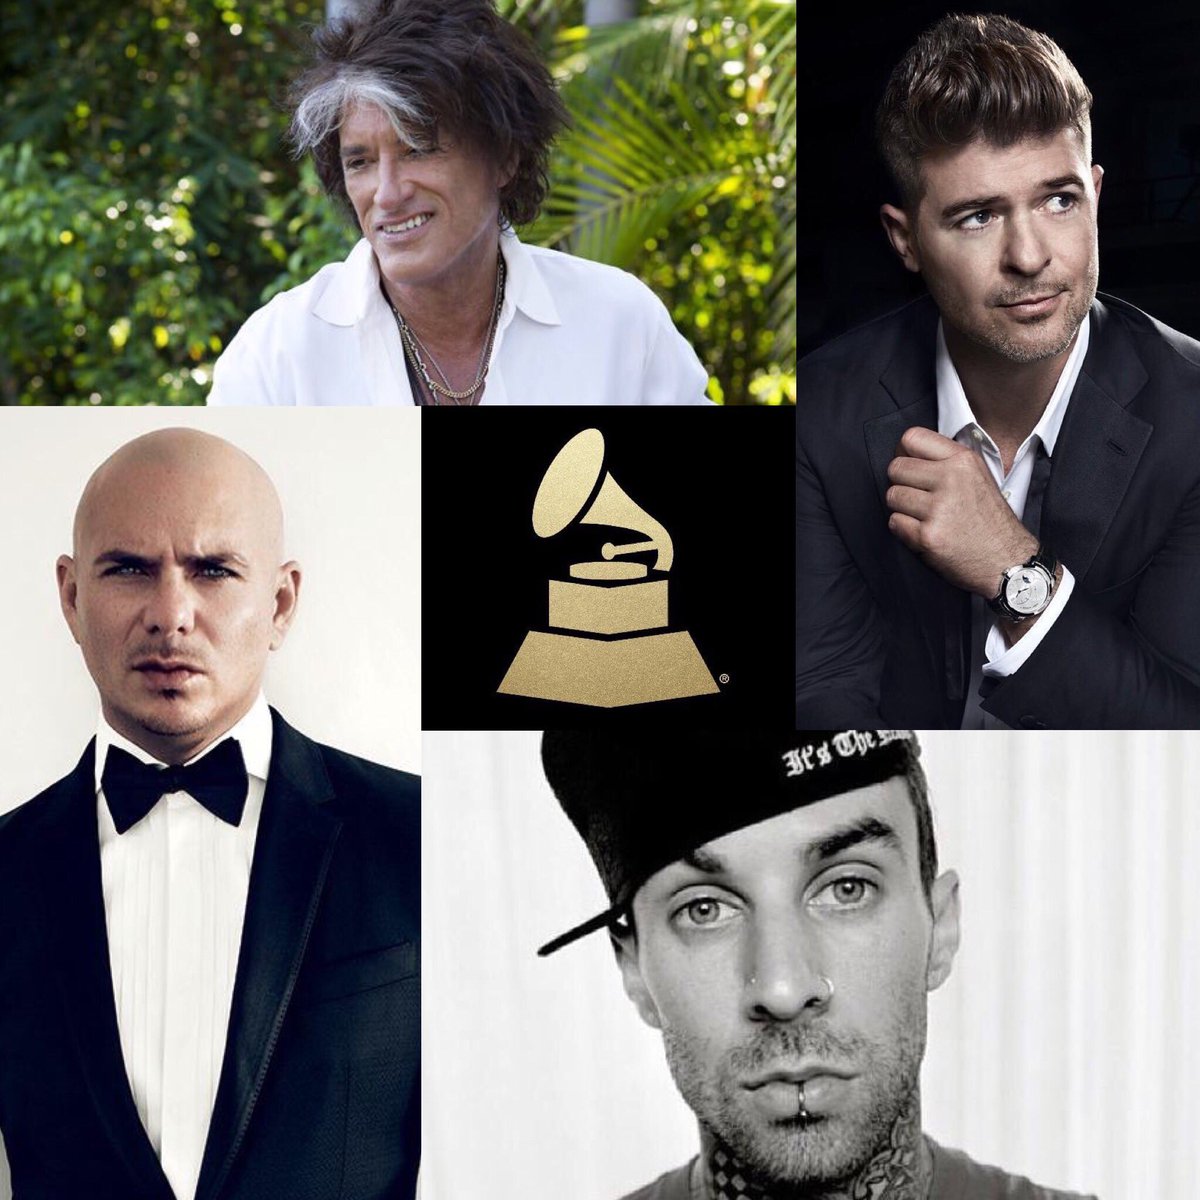 RT @supporting_pit: We are one week away from @pitbull's performance at @TheGRAMMYs with @robinthicke, @JoePerry and @travisbarker ! https:…